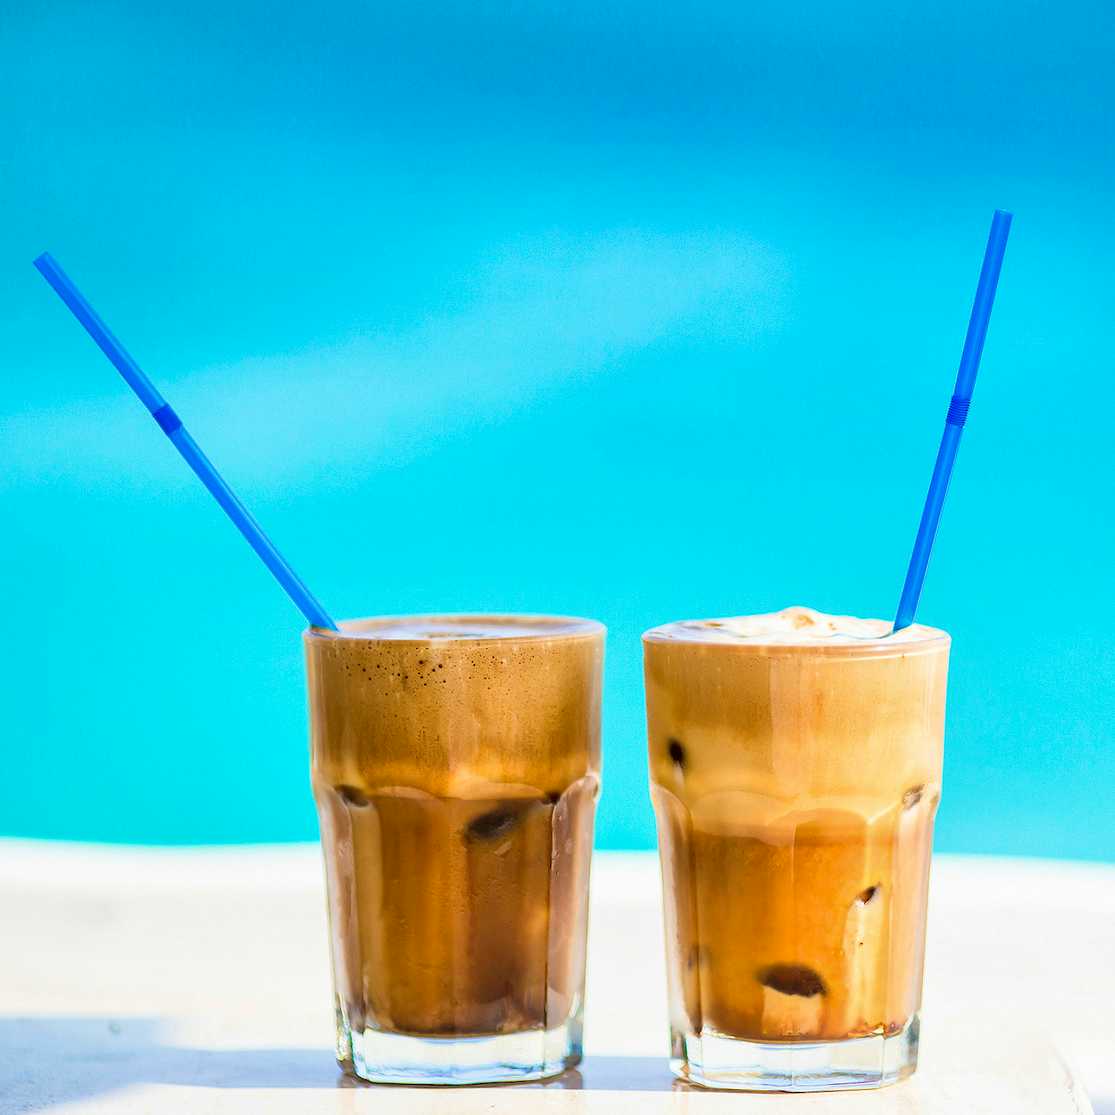 Photo Caption: Have a refreshing iced coffee by the pool